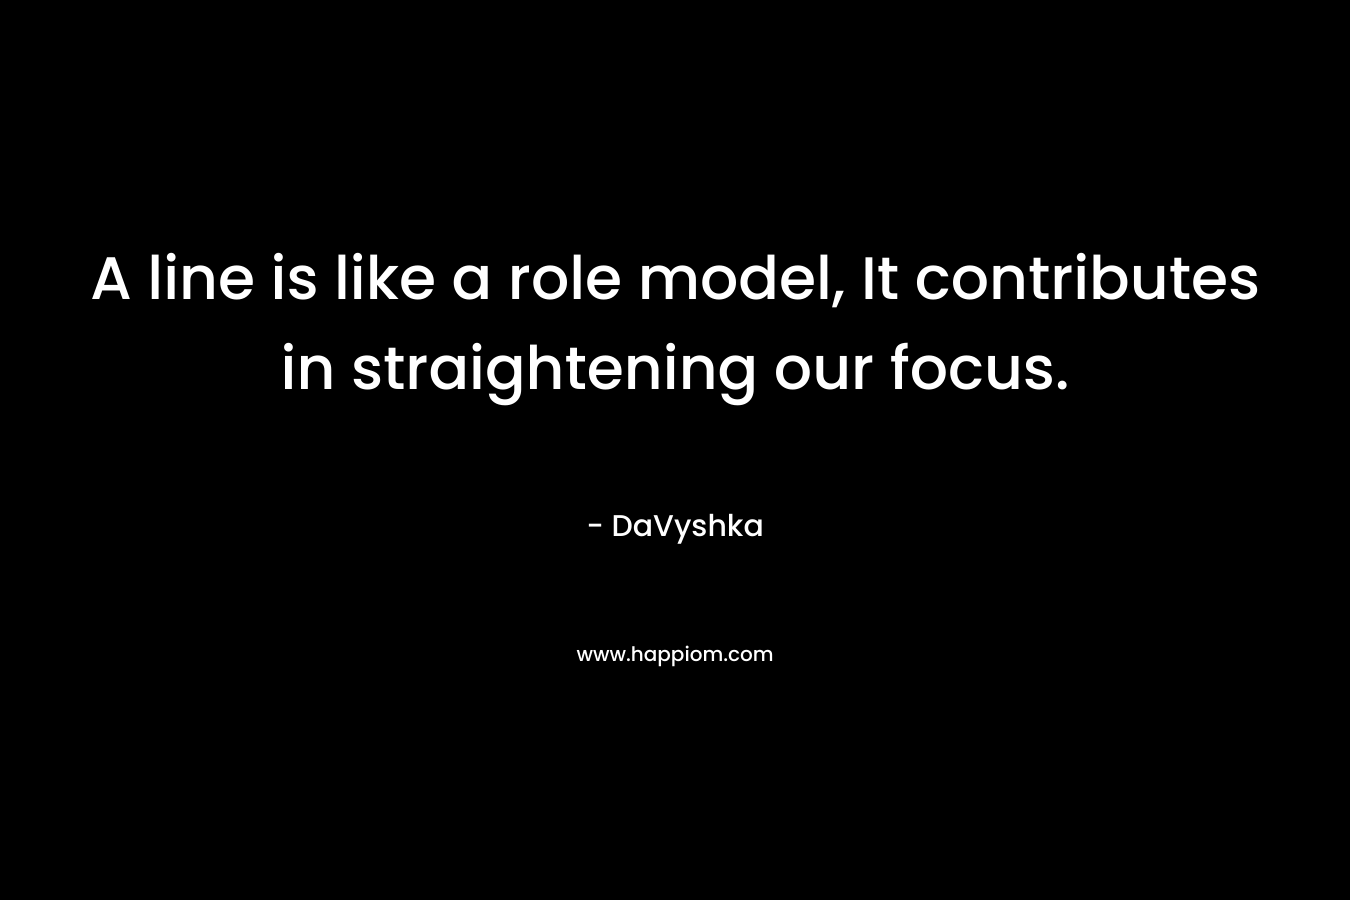 A line is like a role model, It contributes in straightening our focus. – DaVyshka